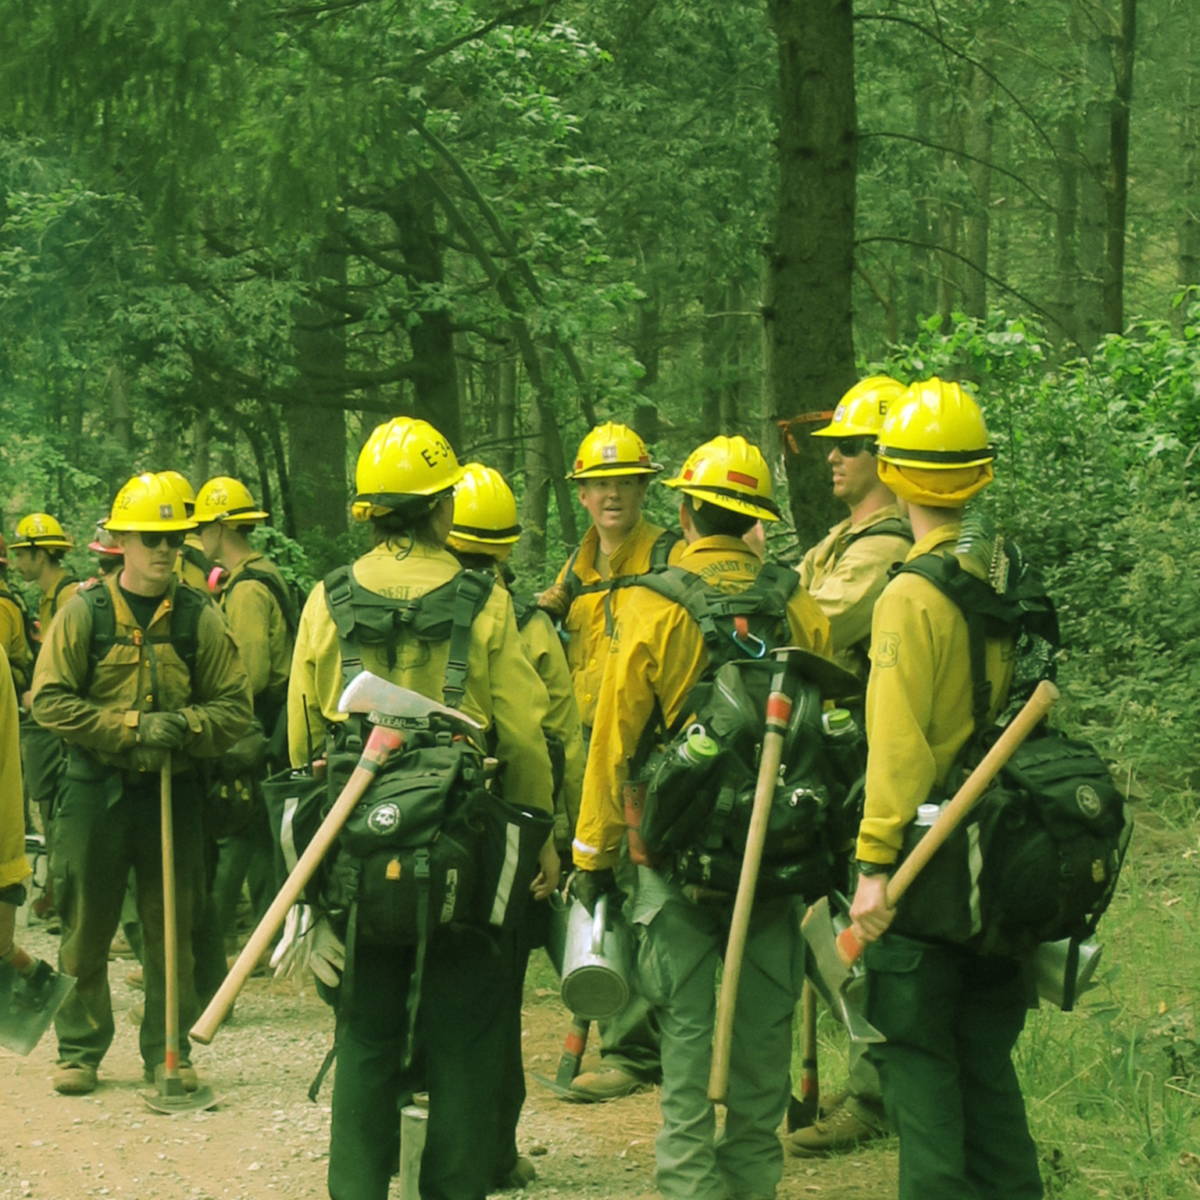 a group of people wearing construction gear in a forest